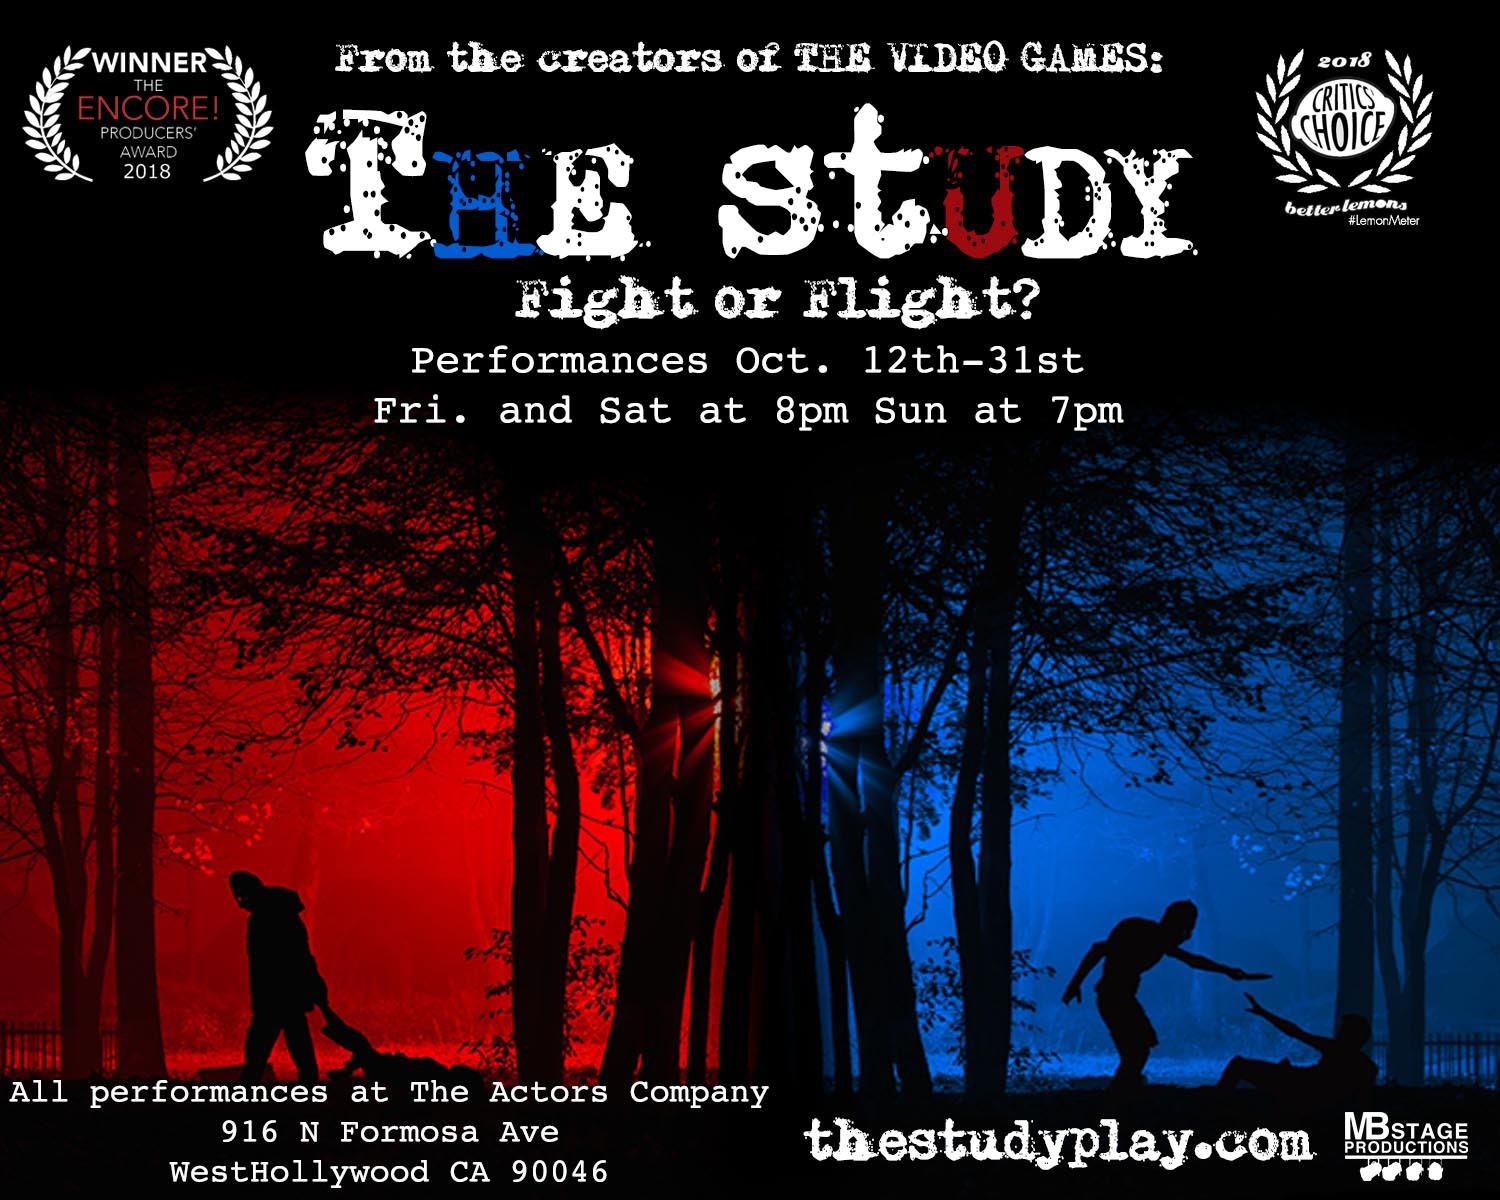 THE STUDY opening for a LIMITED run Oct 12th-31st 1